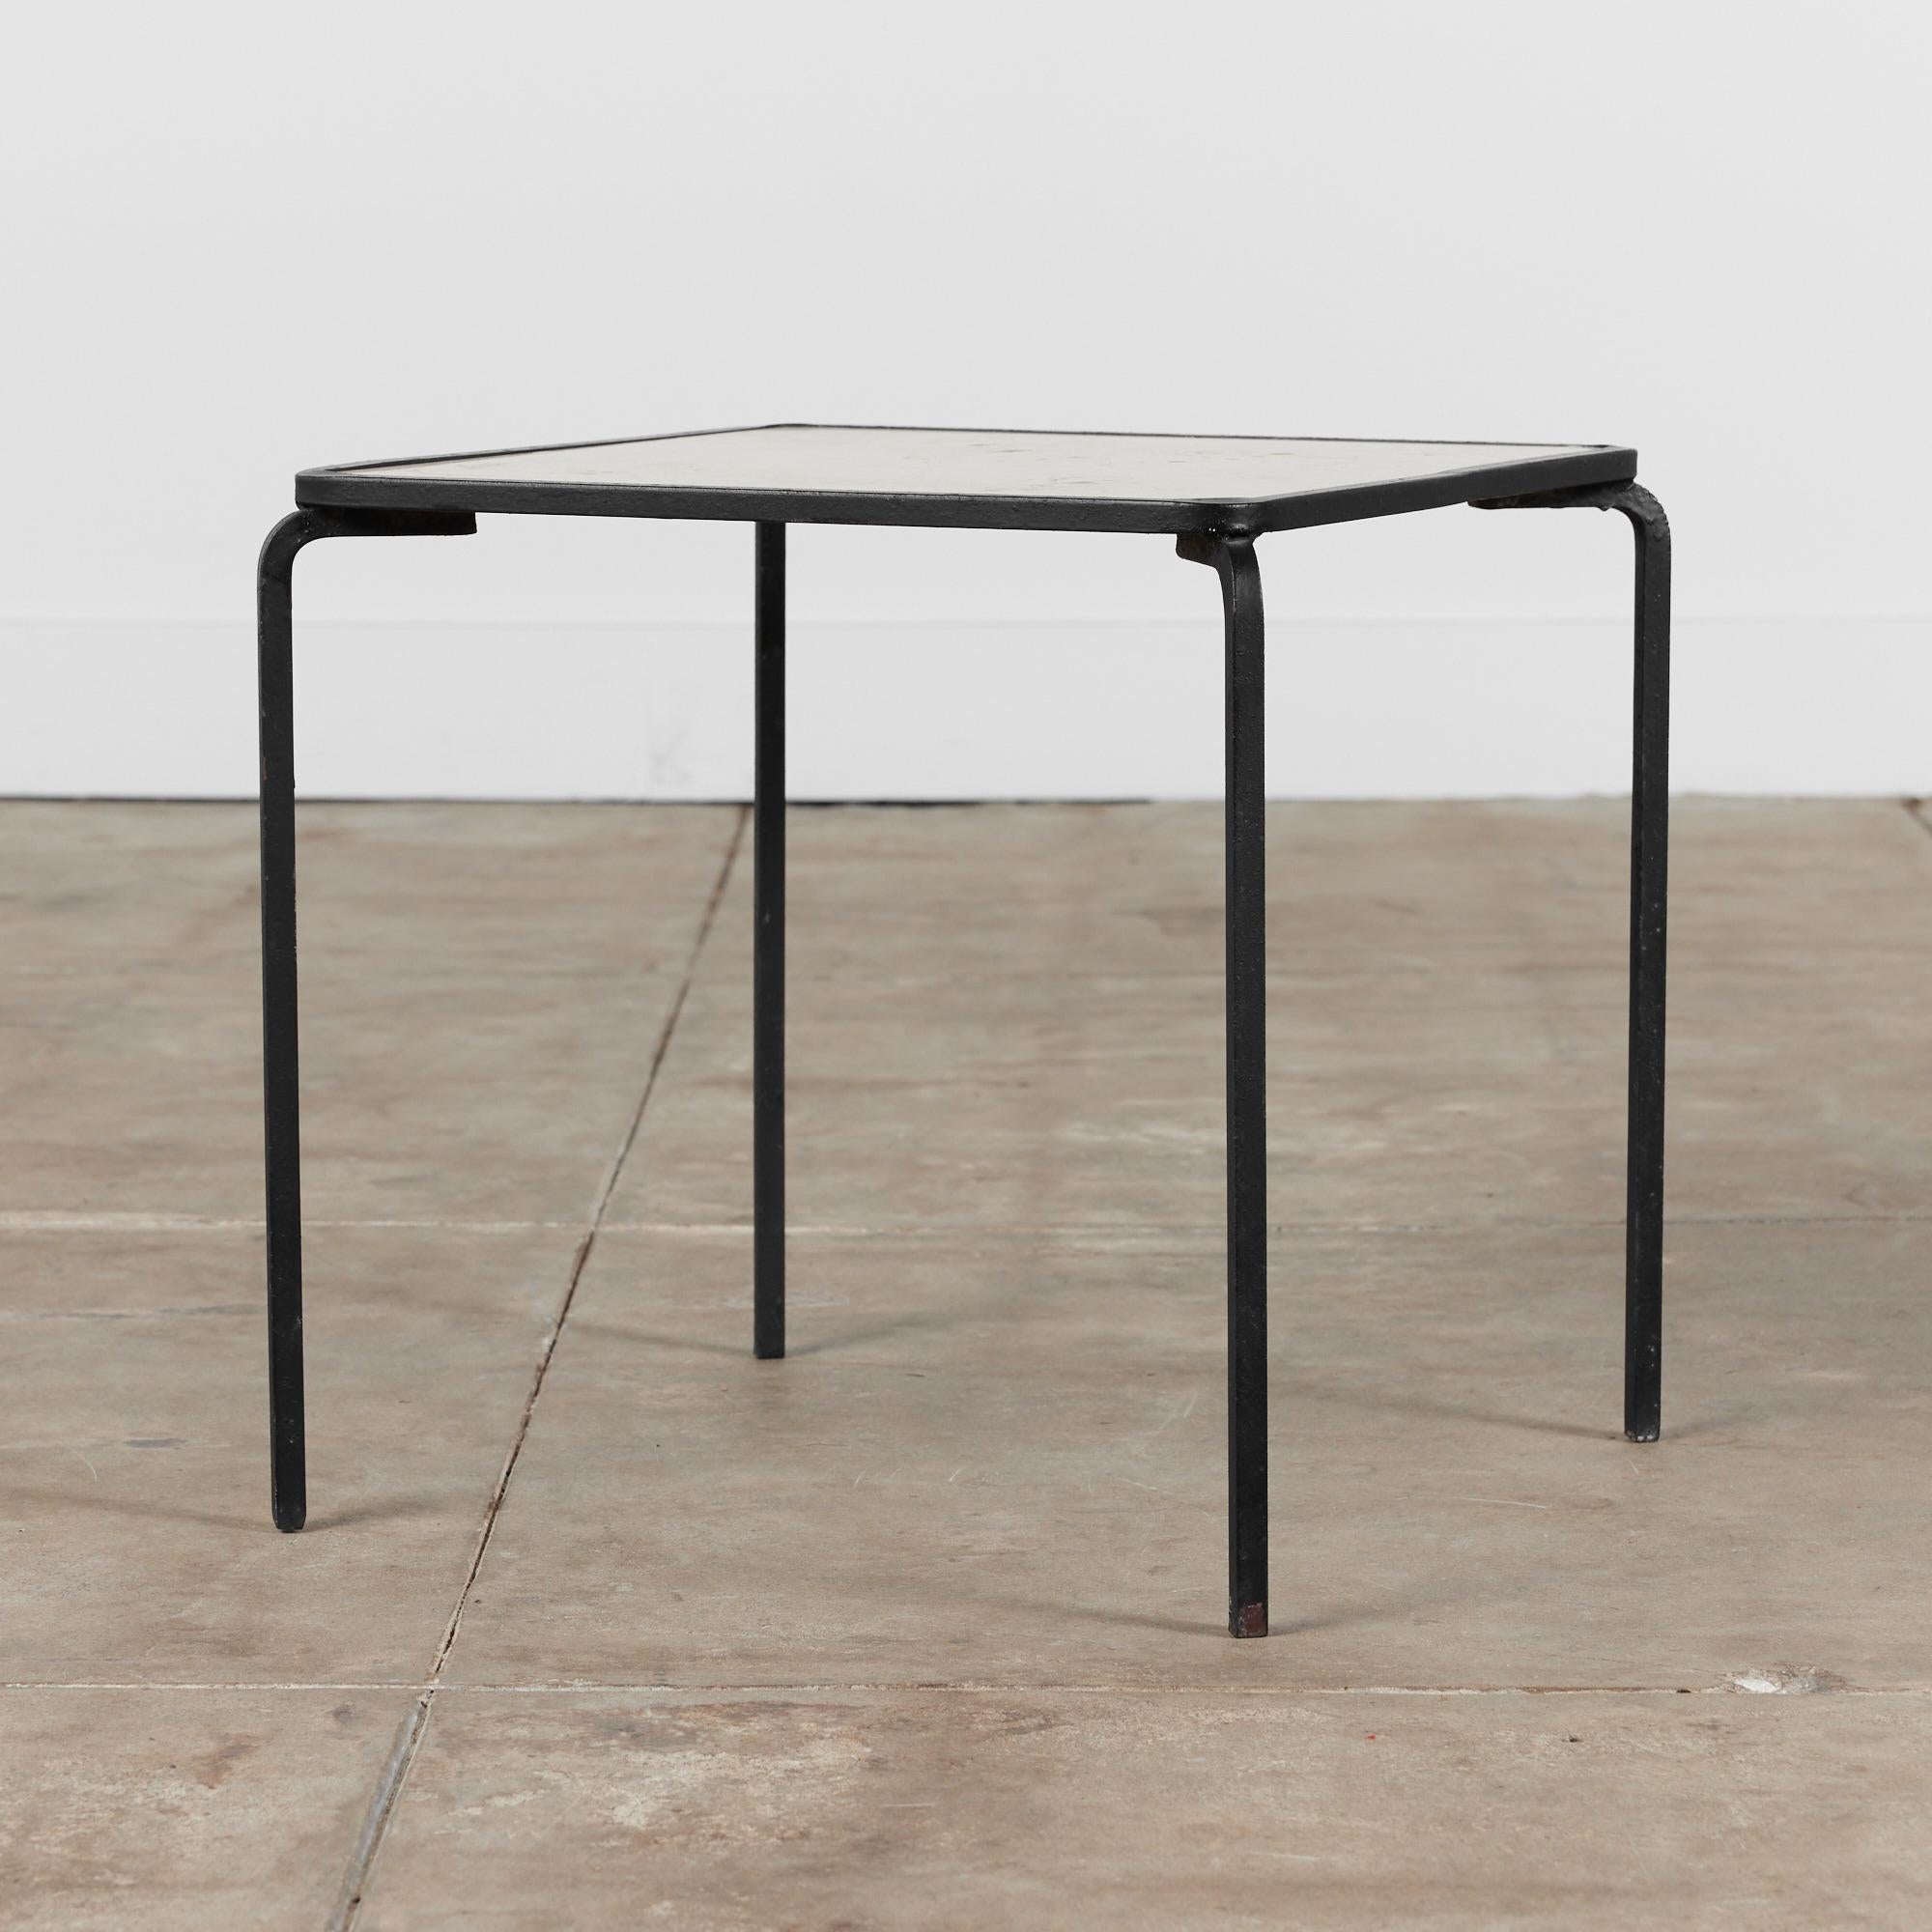 Ebonized Allan Gould Square Travertine Side Table for Reilly-Wolff